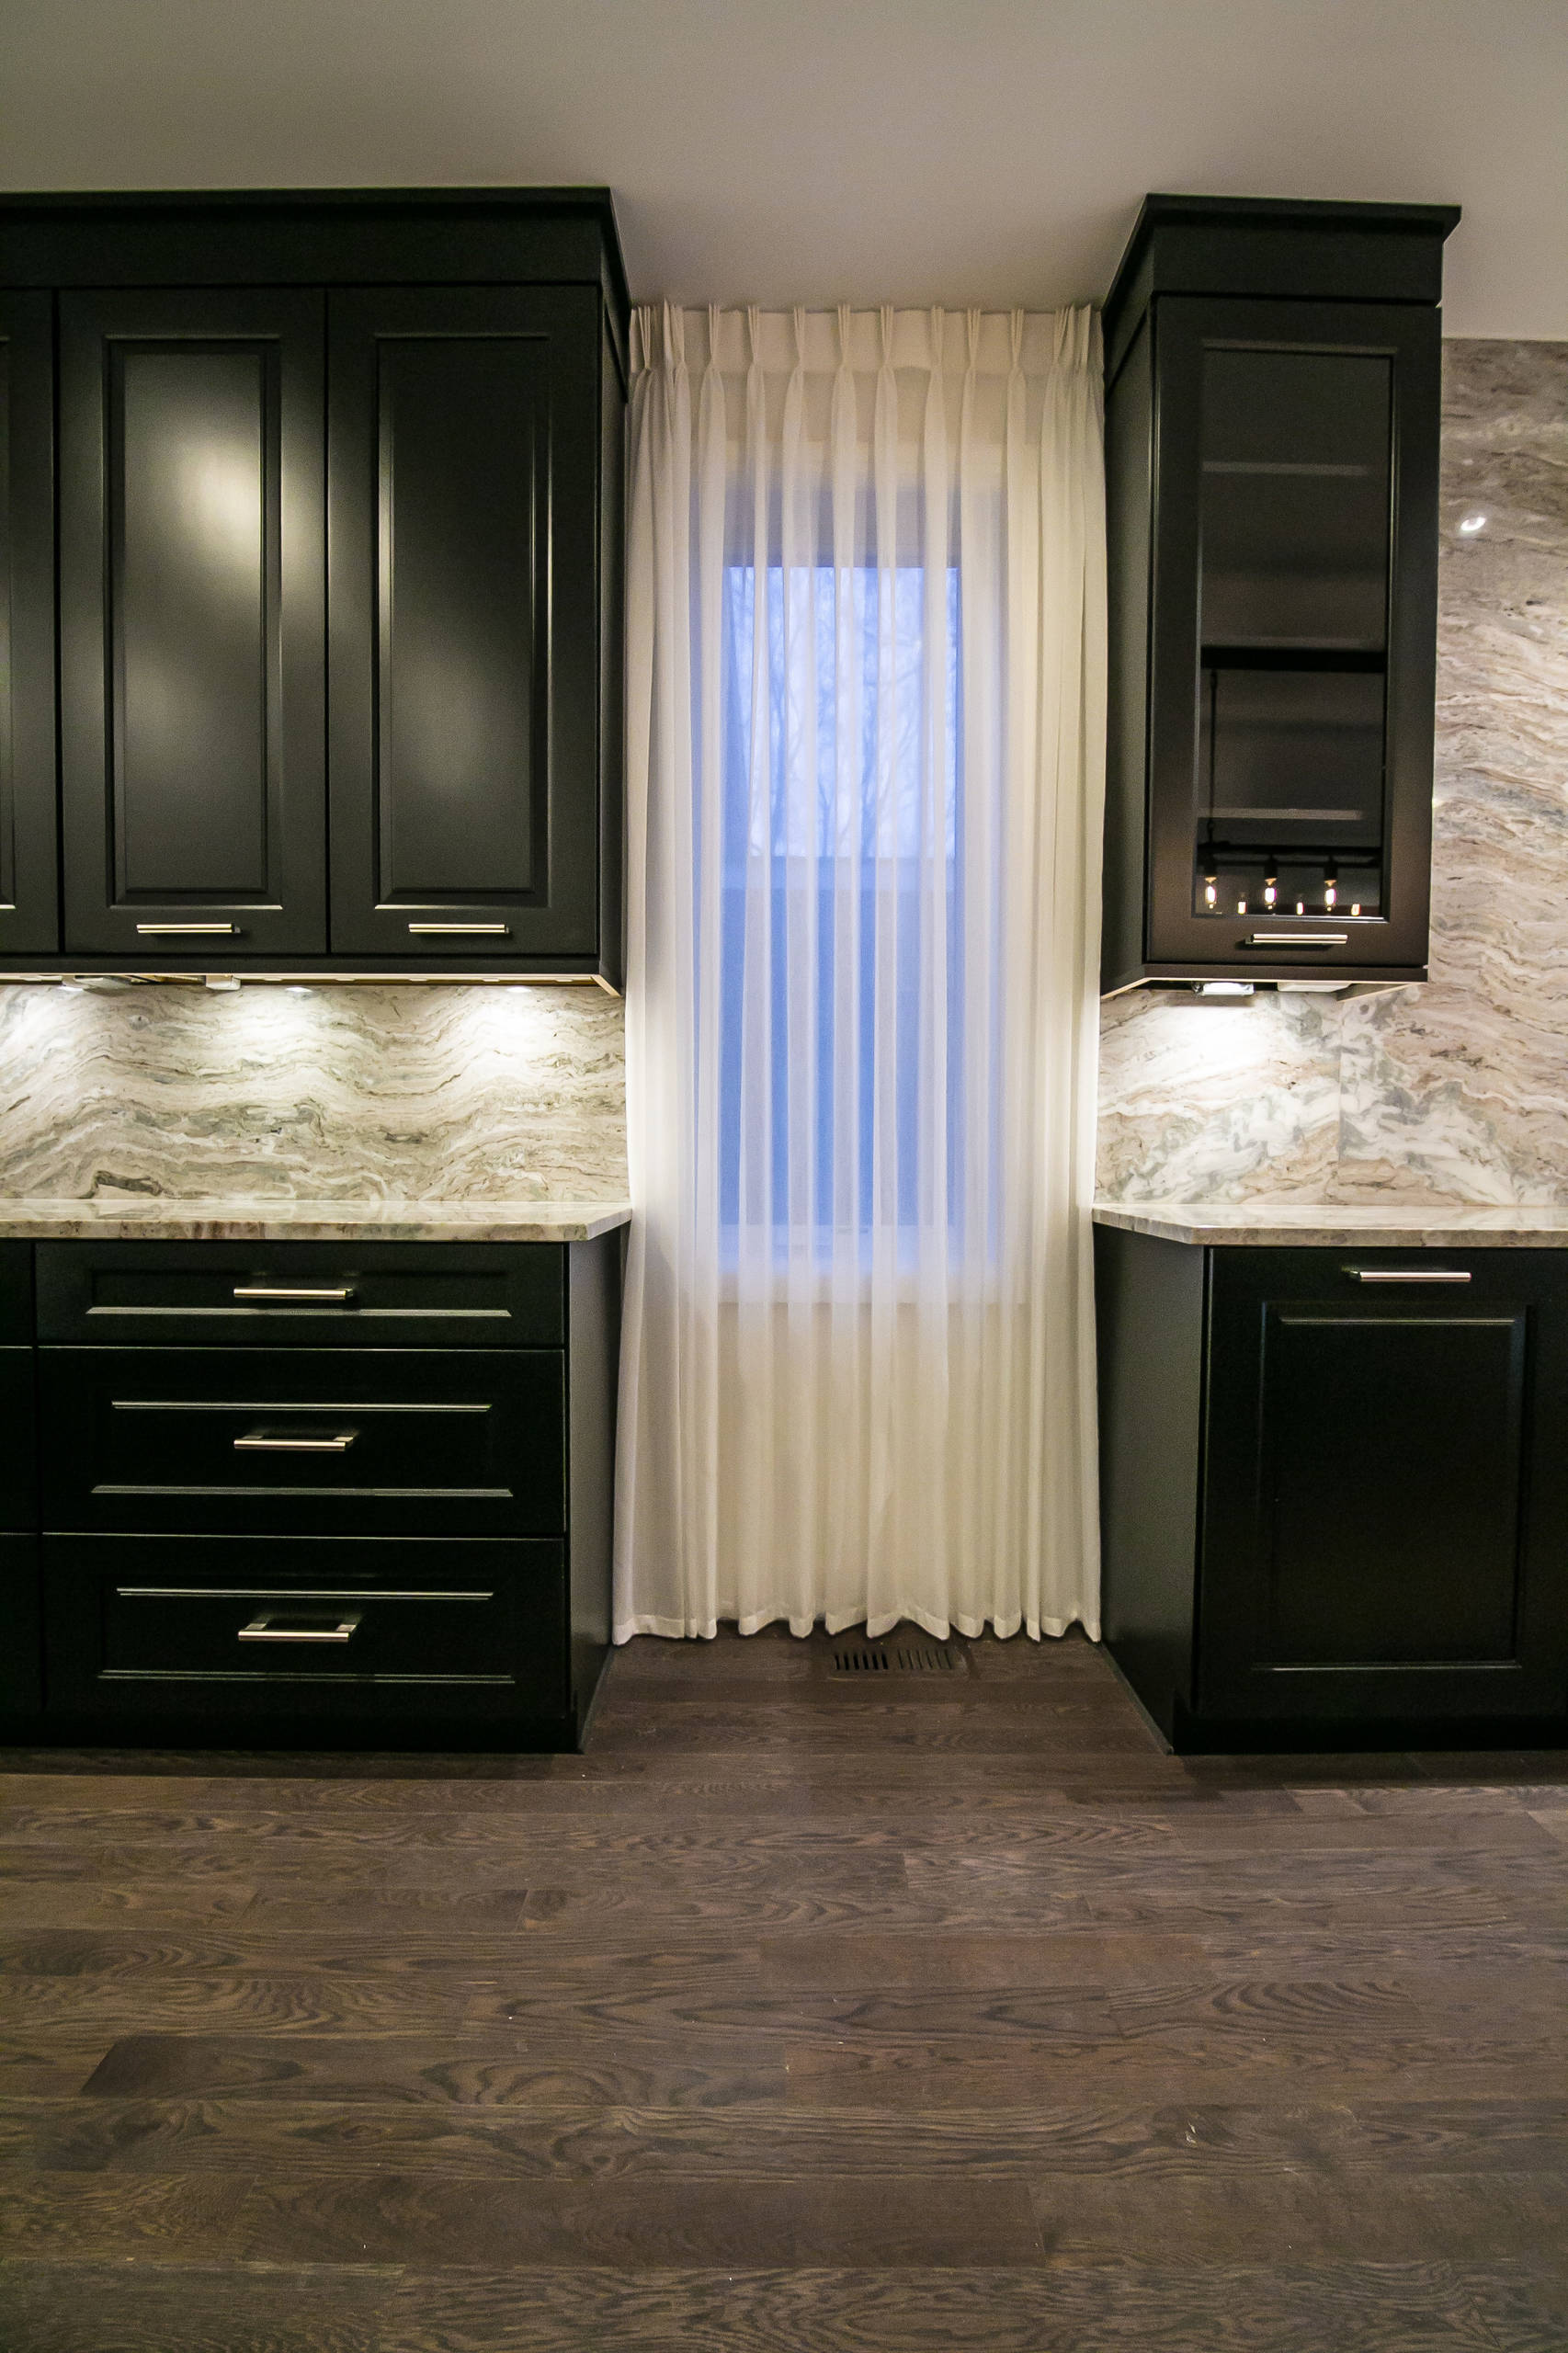 The desire for a modern, yet luxurious, aesthetic inspired a specific attention to detail and material for this home in Huntington Woods. Custom black cabinetry, Fantasy Brown quartzite and stainless